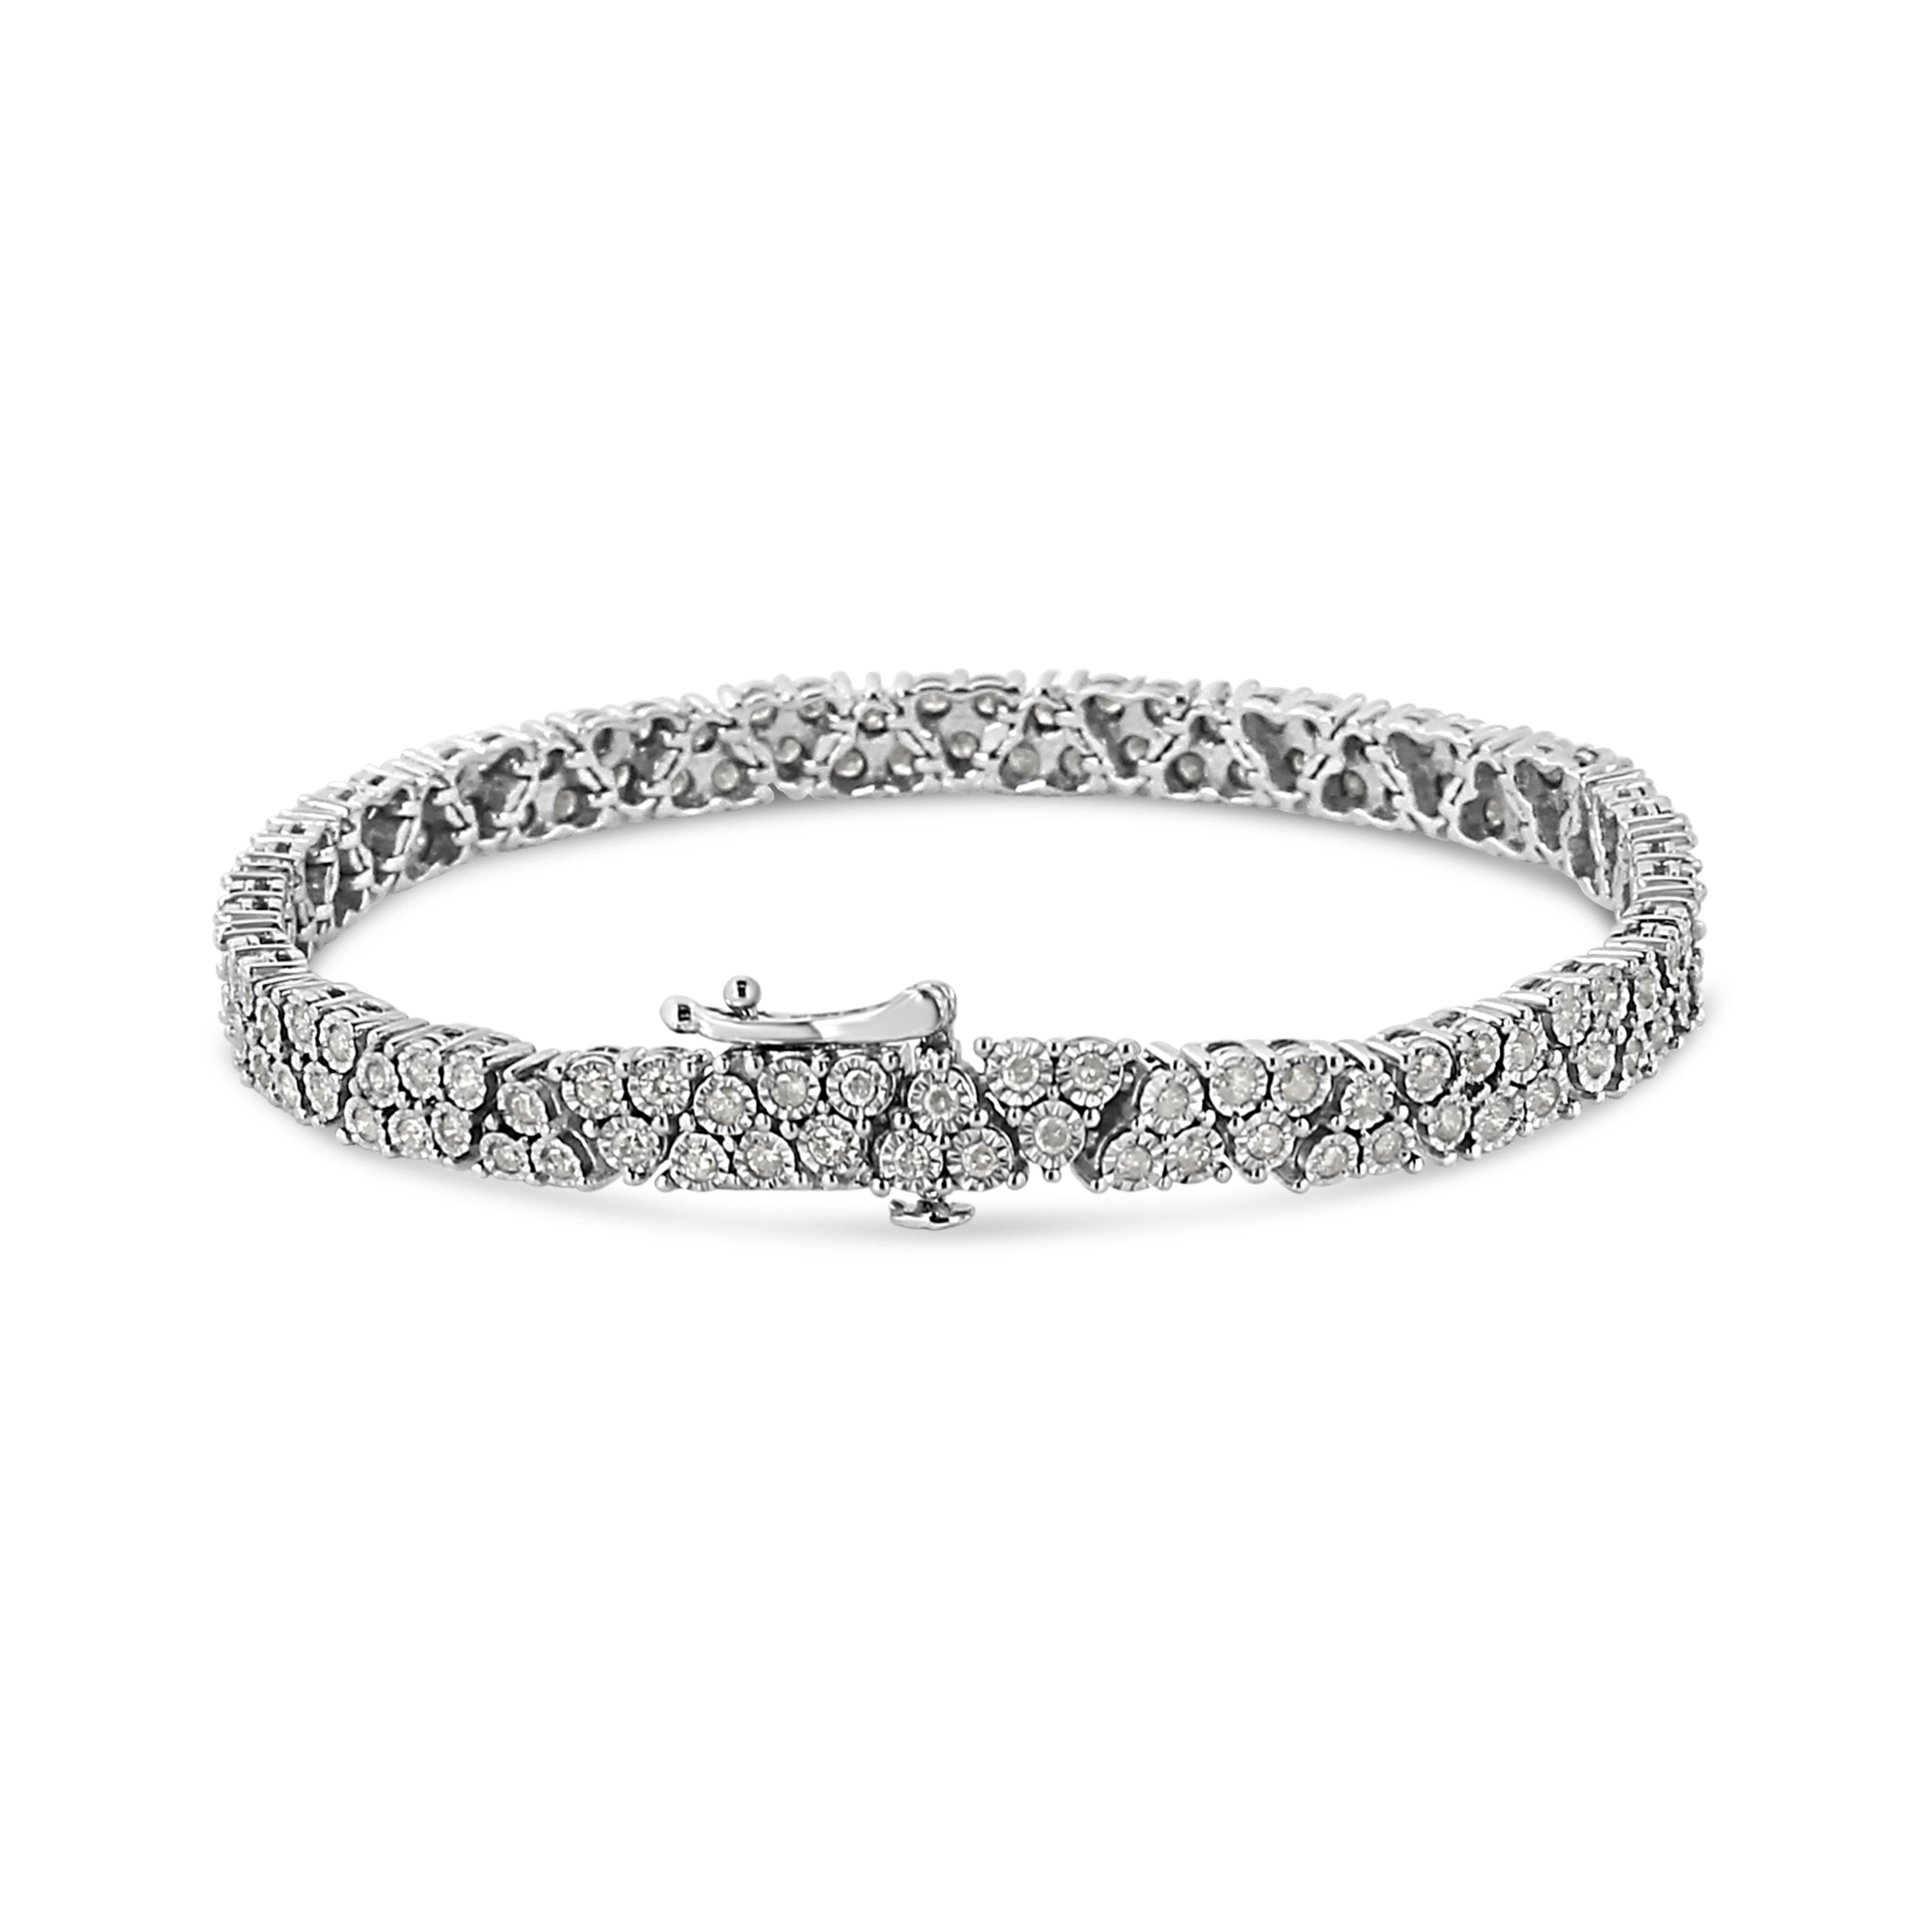 Triangular links embellished with natural, sparkling diamonds are set in gleaming silver to create this alluring tennis bracelet. This piece is crafted in the finest .925 sterling silver, and plated with rhodium (a platinum-family metal) for a